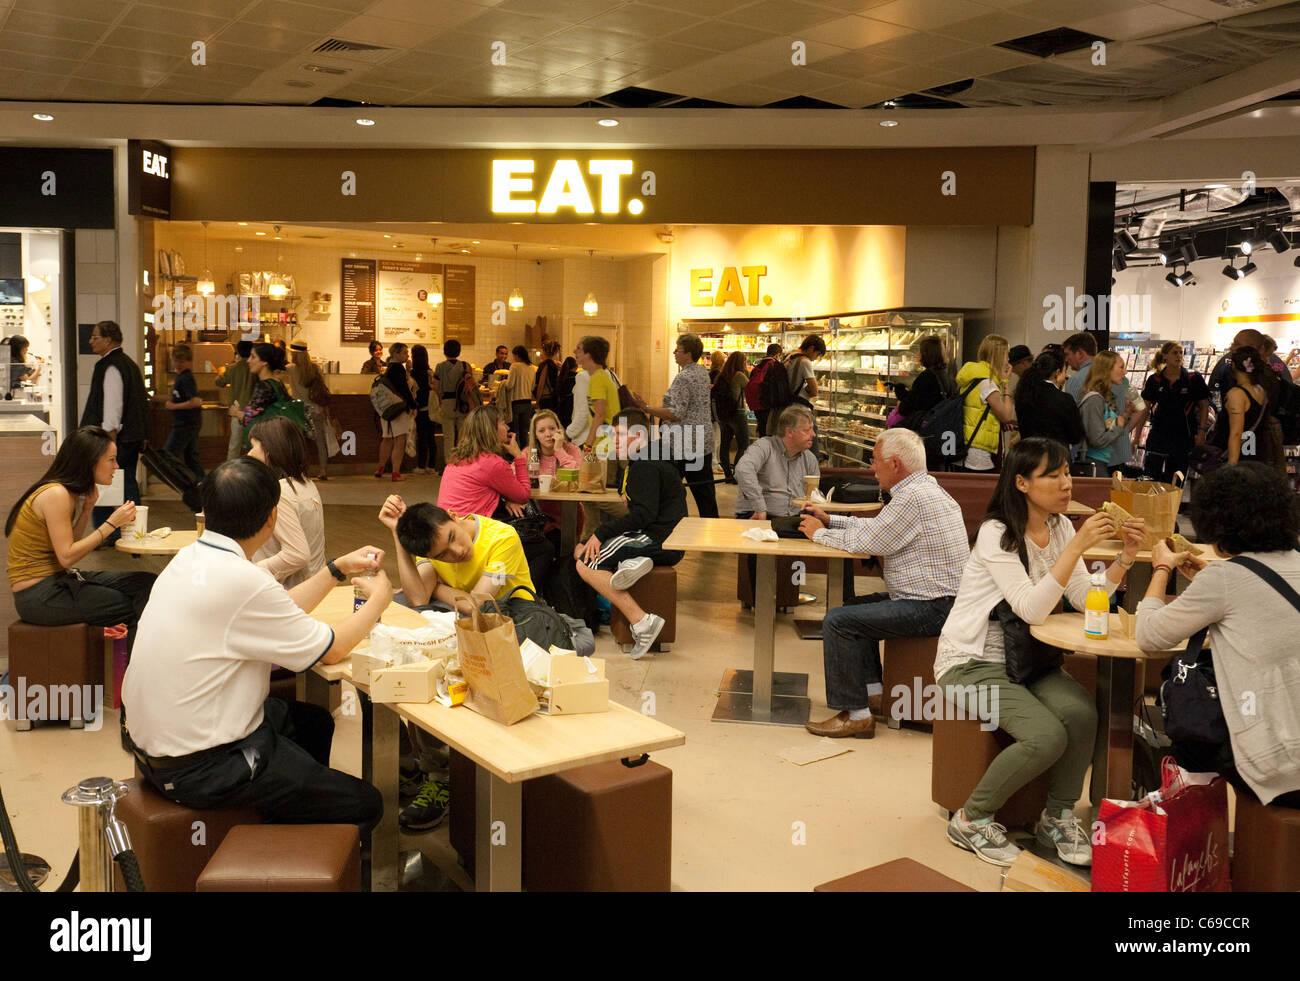 The EAT cafe restaurant in Terminal 3, Heathrow airport London UK Stock Photo